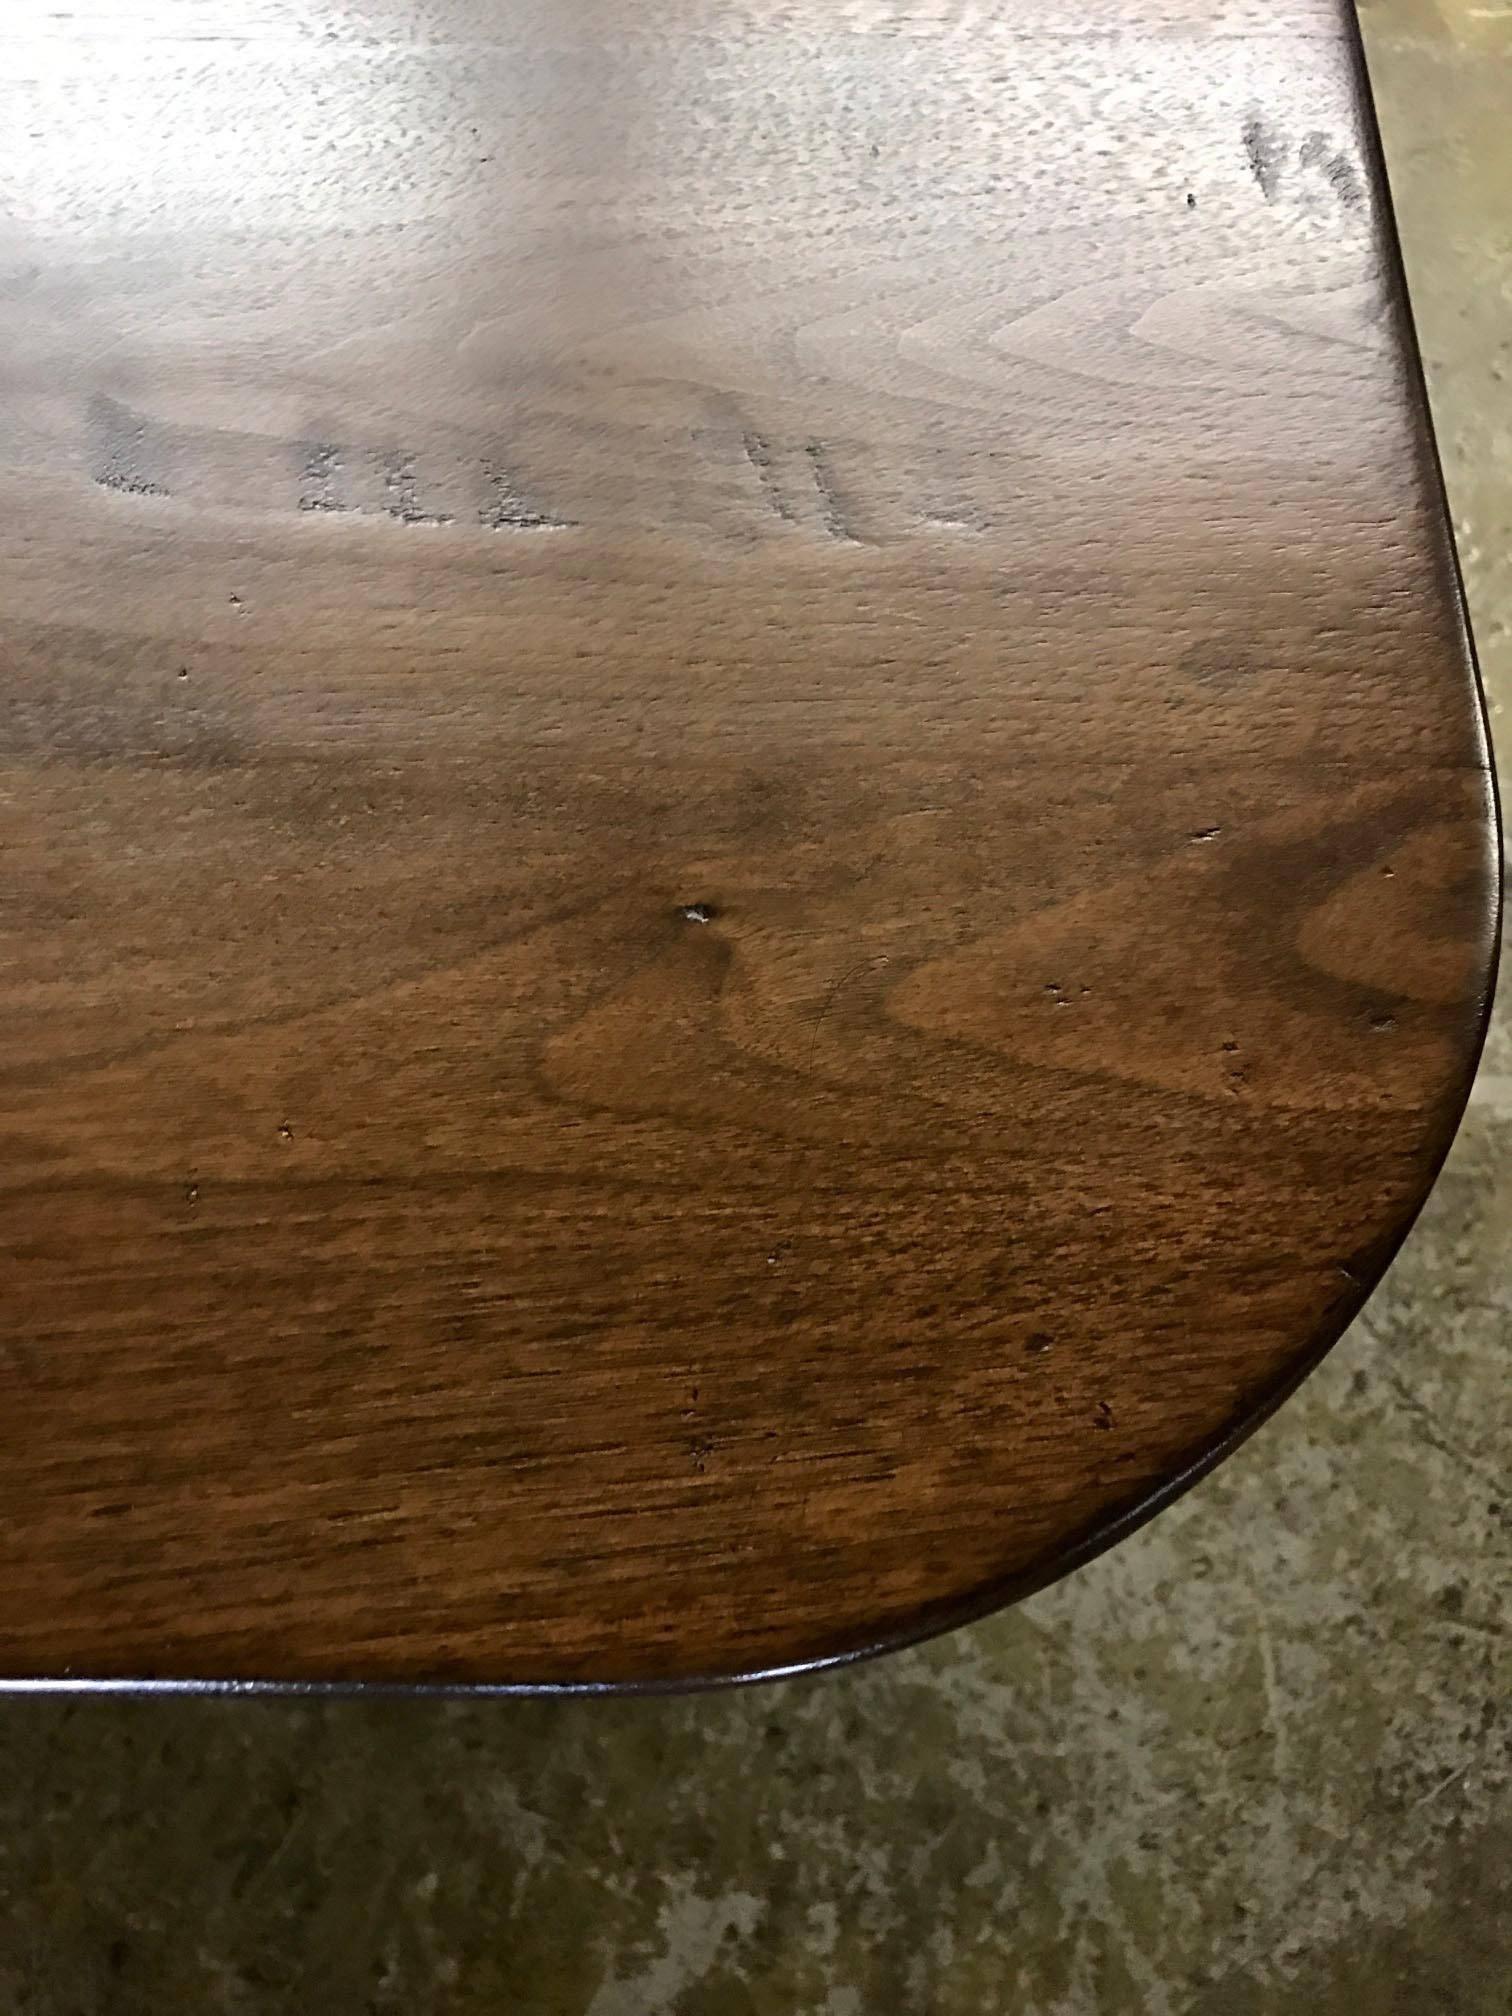 Custom beehive pedestal table with square top and 6 inch radius corners. Top is 1 7/8 inches thick. Can be custom-made in oak, mahogany or walnut in custom sizes and finishes. As shown here in walnut with slight hand planing and light distress and